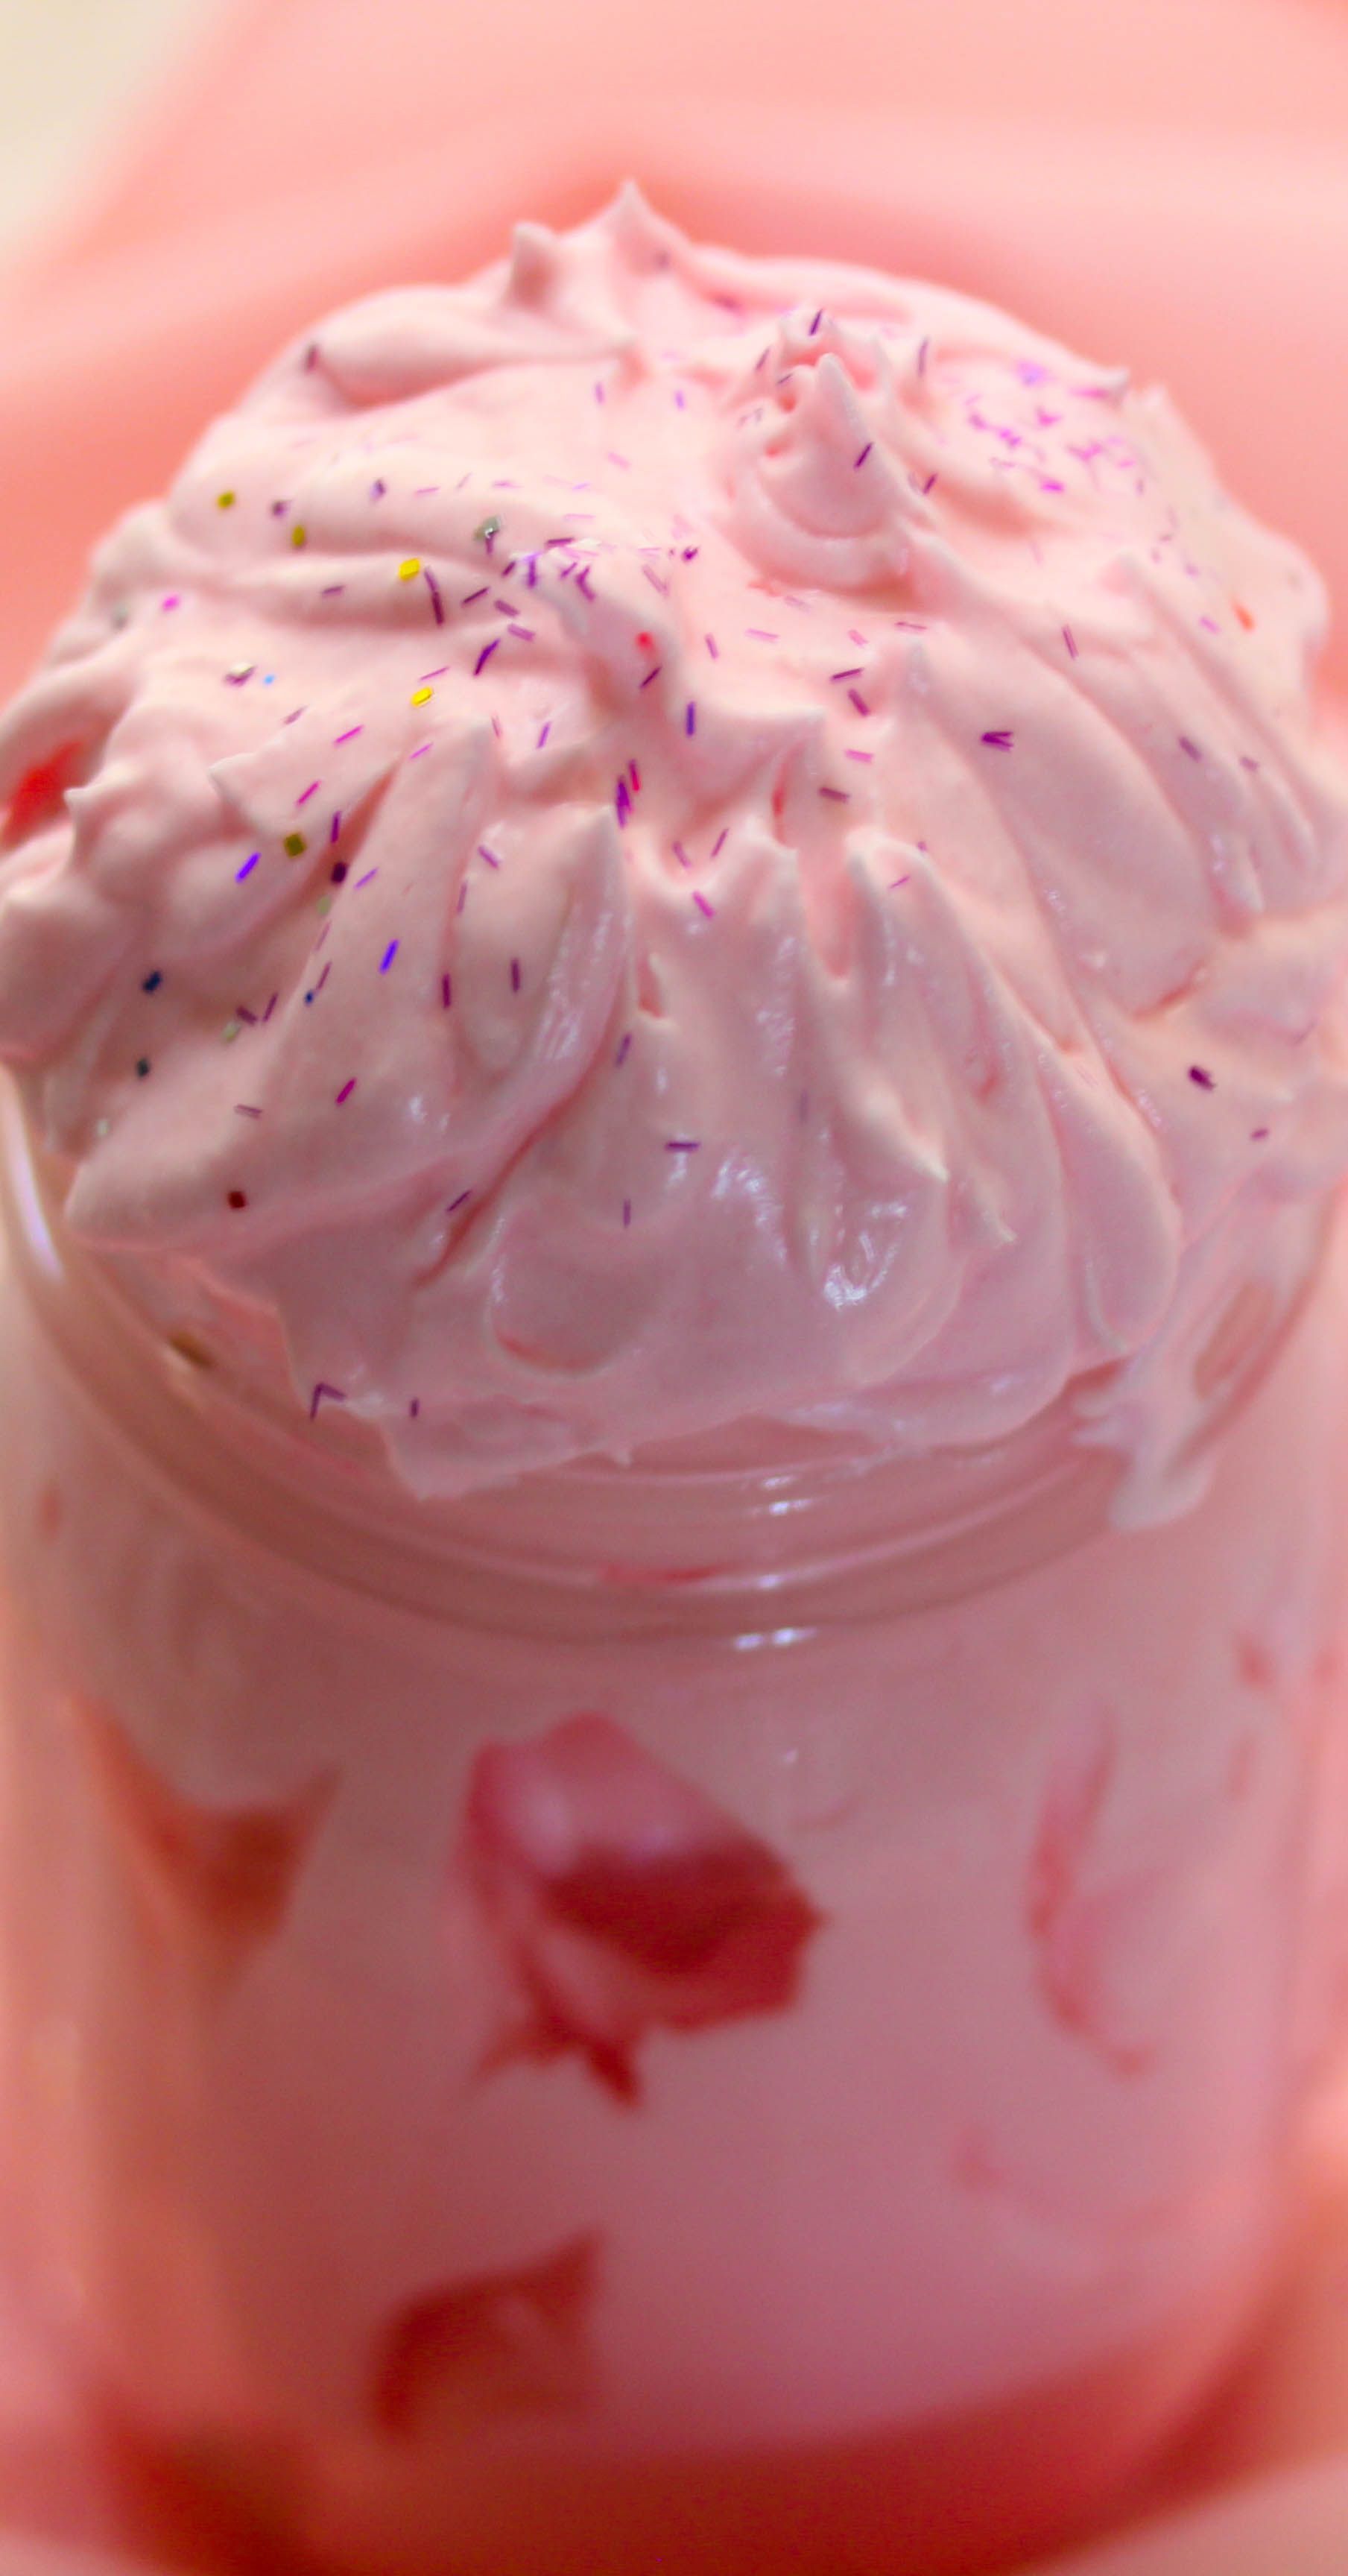 Only four ingredients in this Pretty in pink body homemade butter, use cornstarch so it want become to greasy…